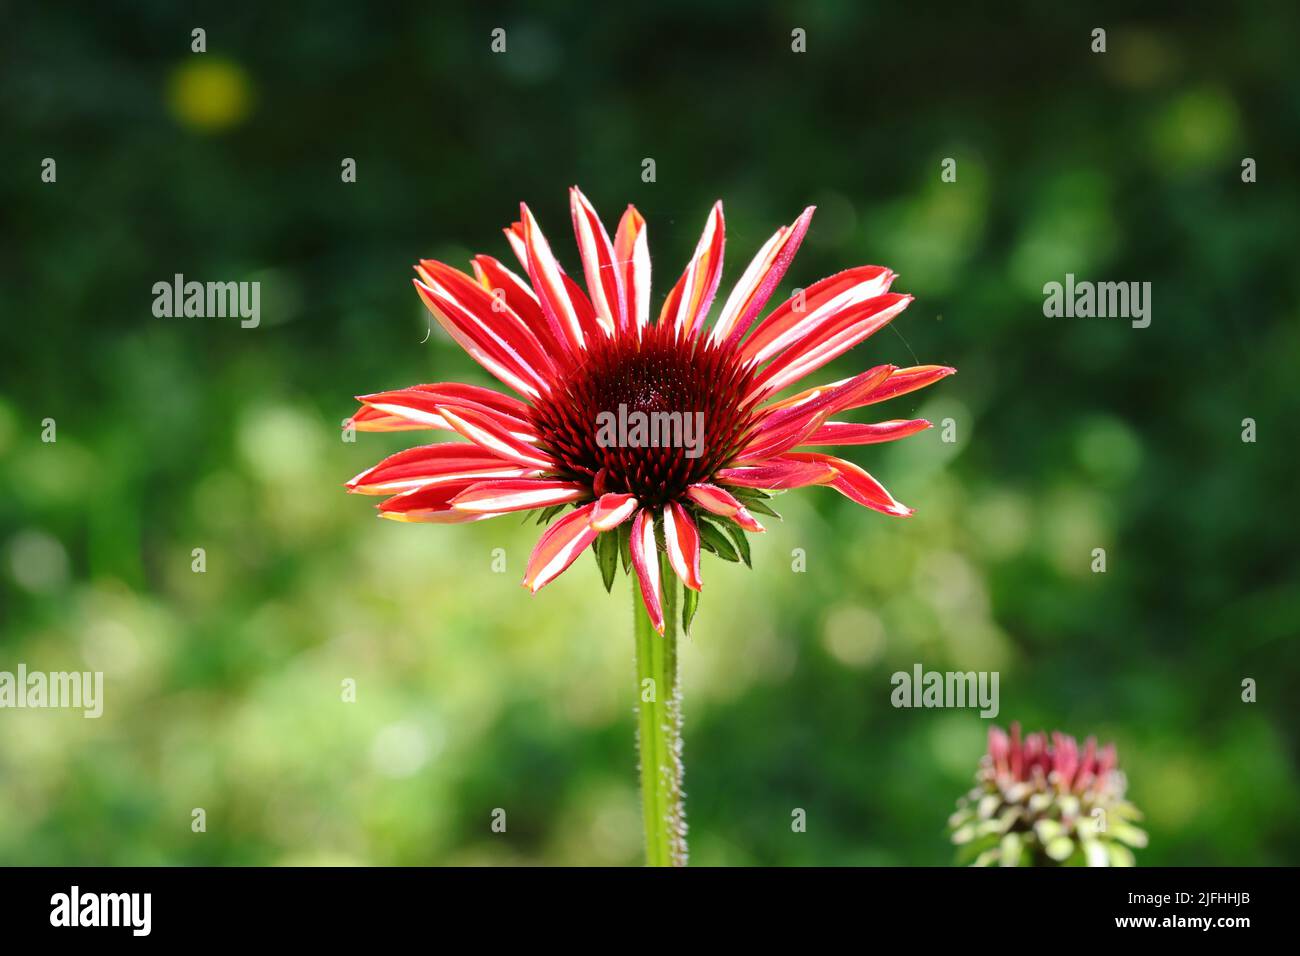 close-up of a fresh opening flower of an echinacea purpurea against a blurry natural background Stock Photo